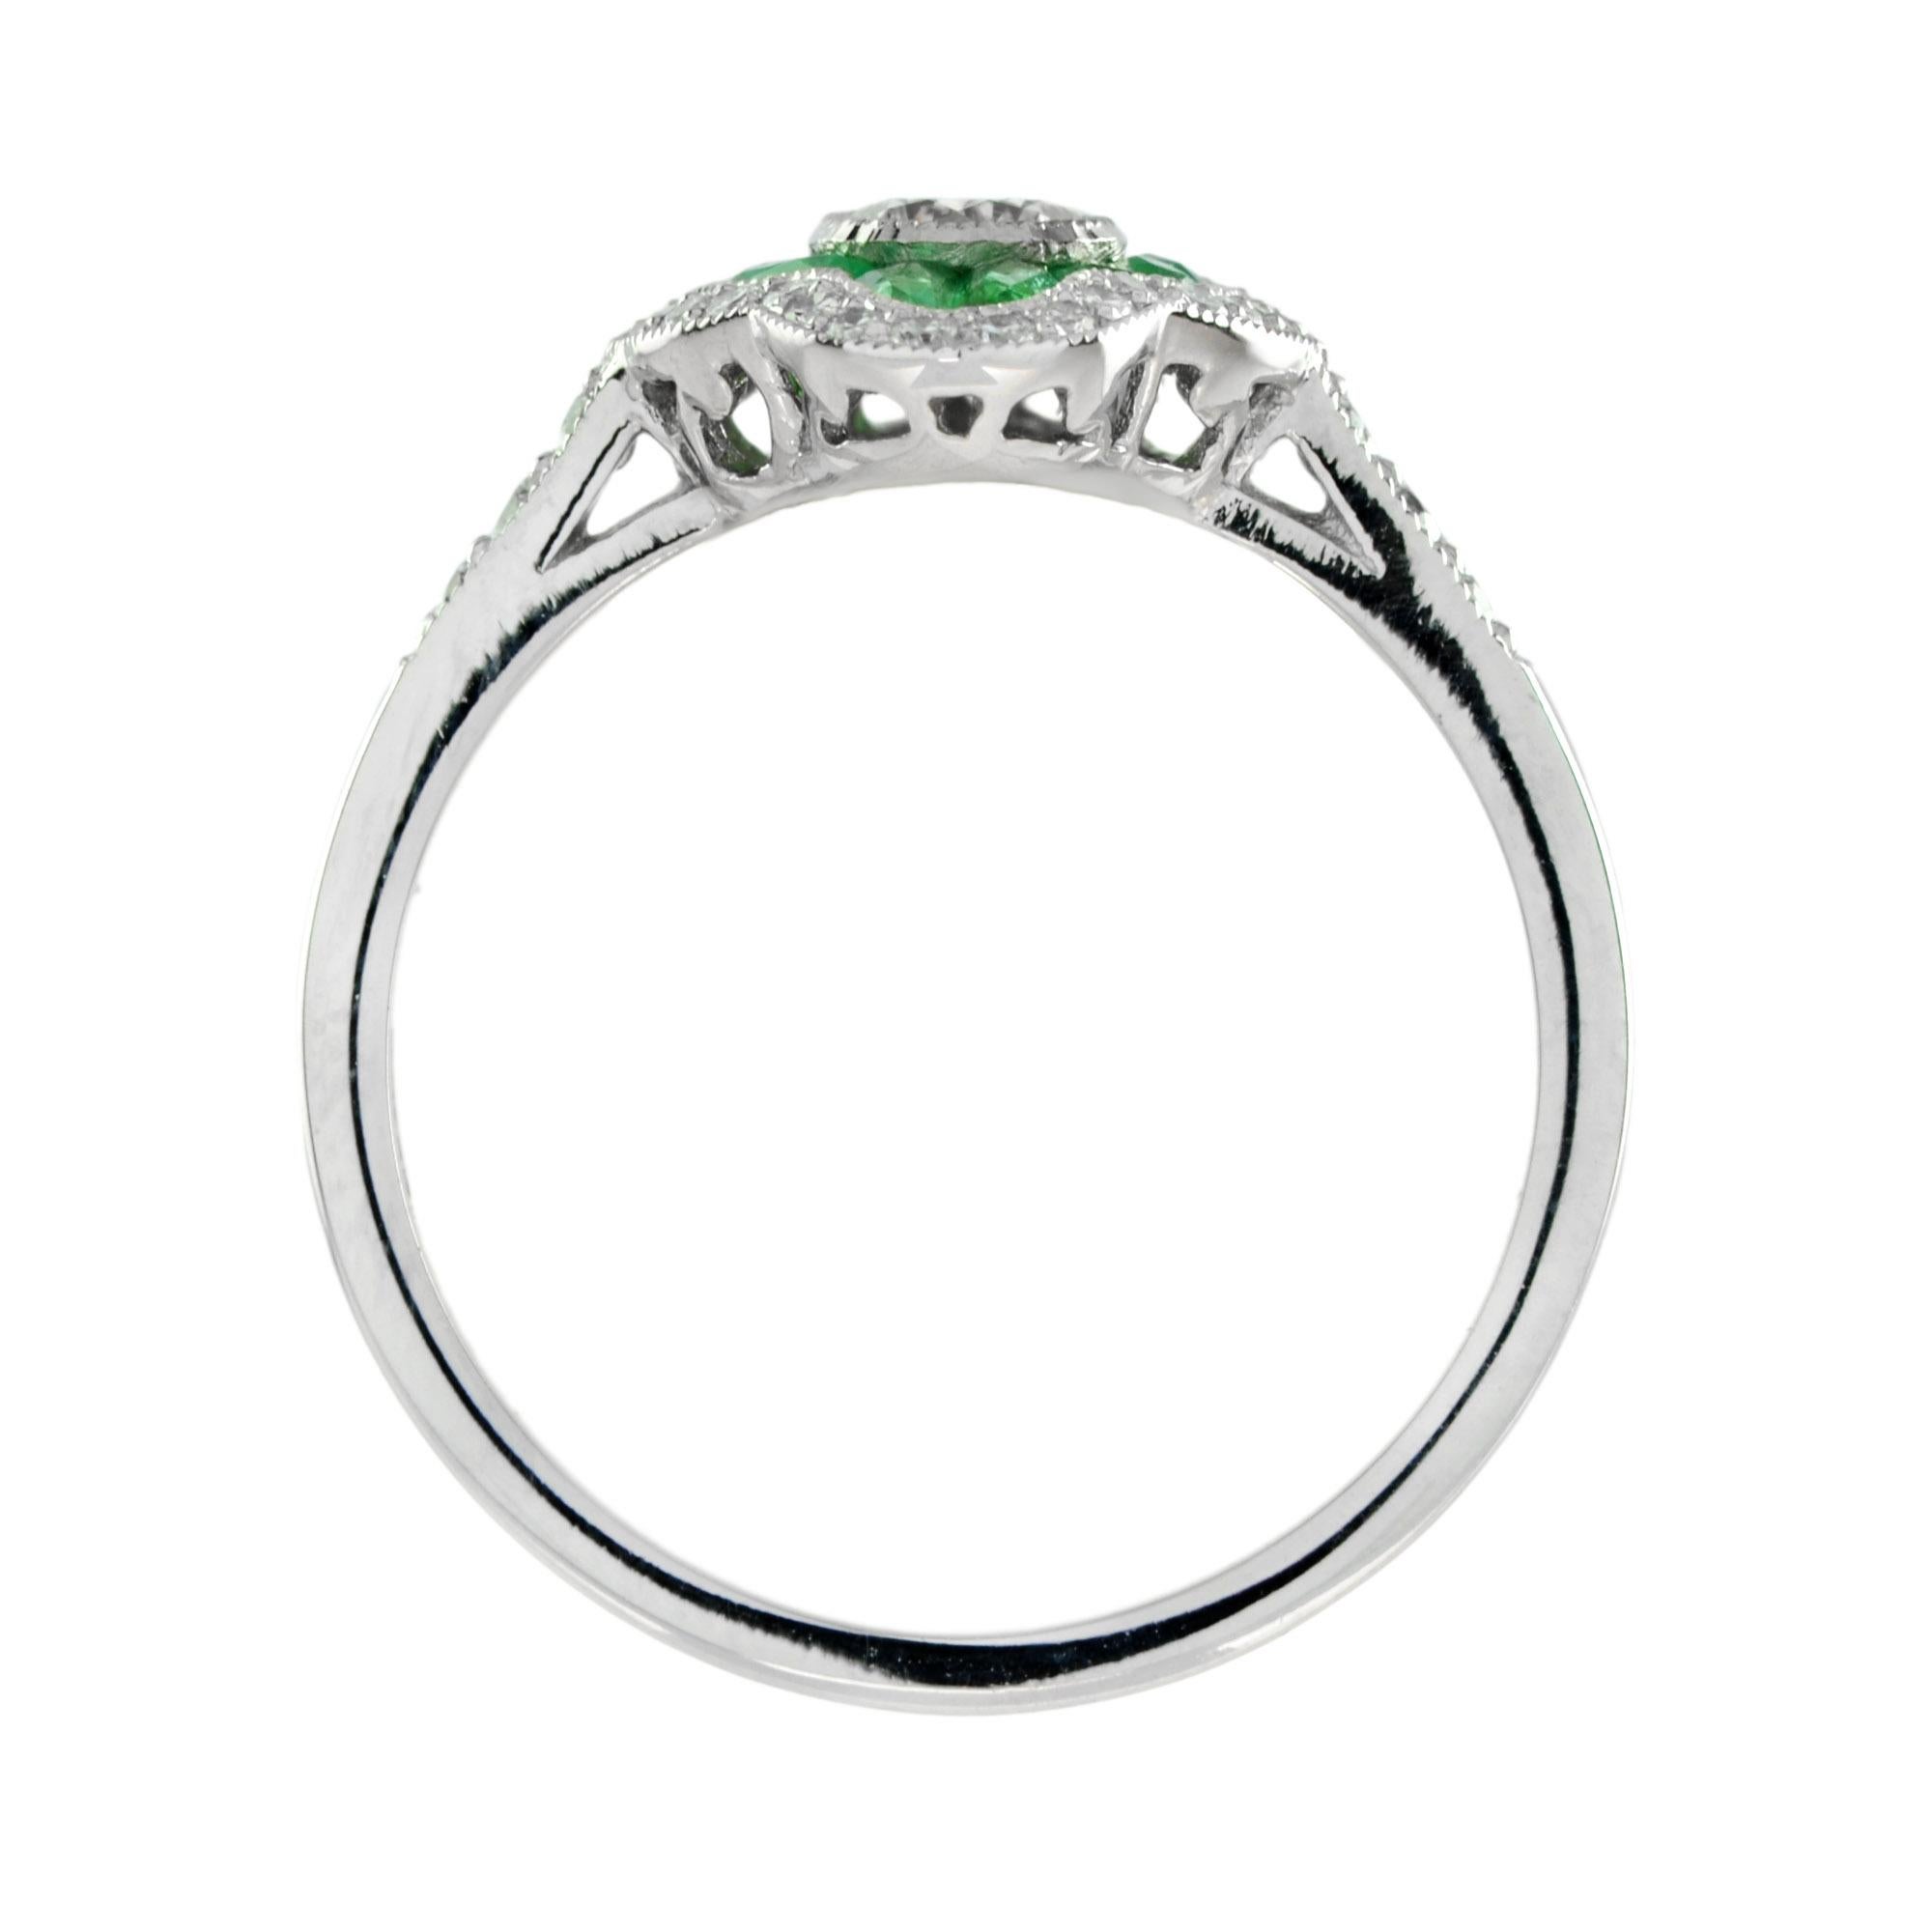 For Sale:  Art Deco Style Diamond and Emerald Engagement Ring in 18K White Gold 6